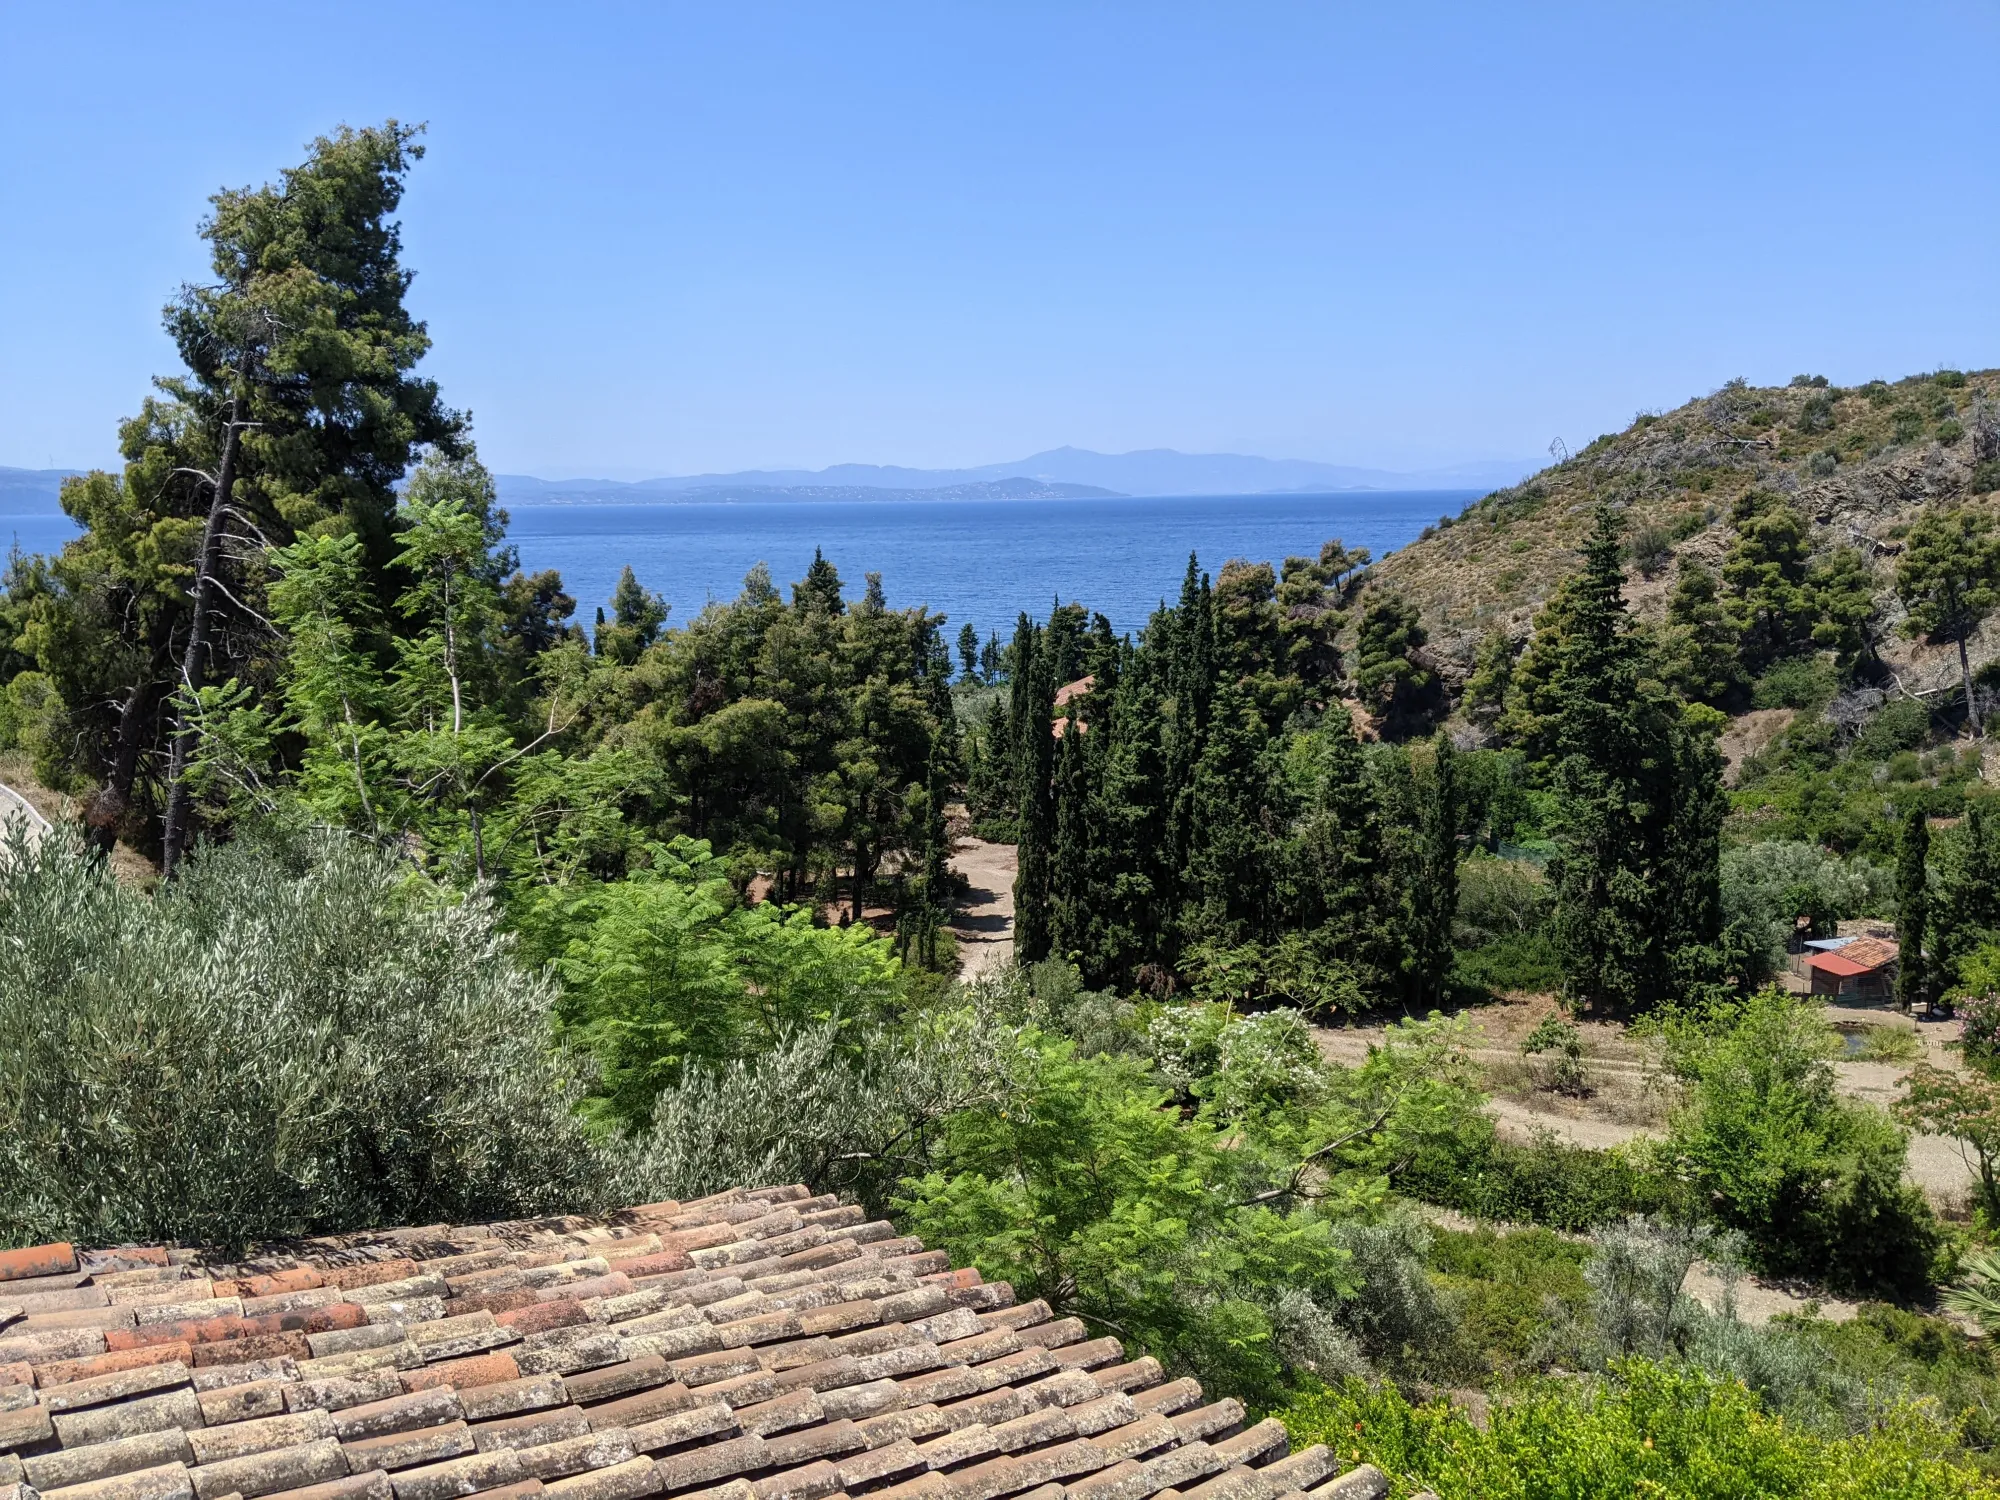 View of the ocean from Evia, Greece